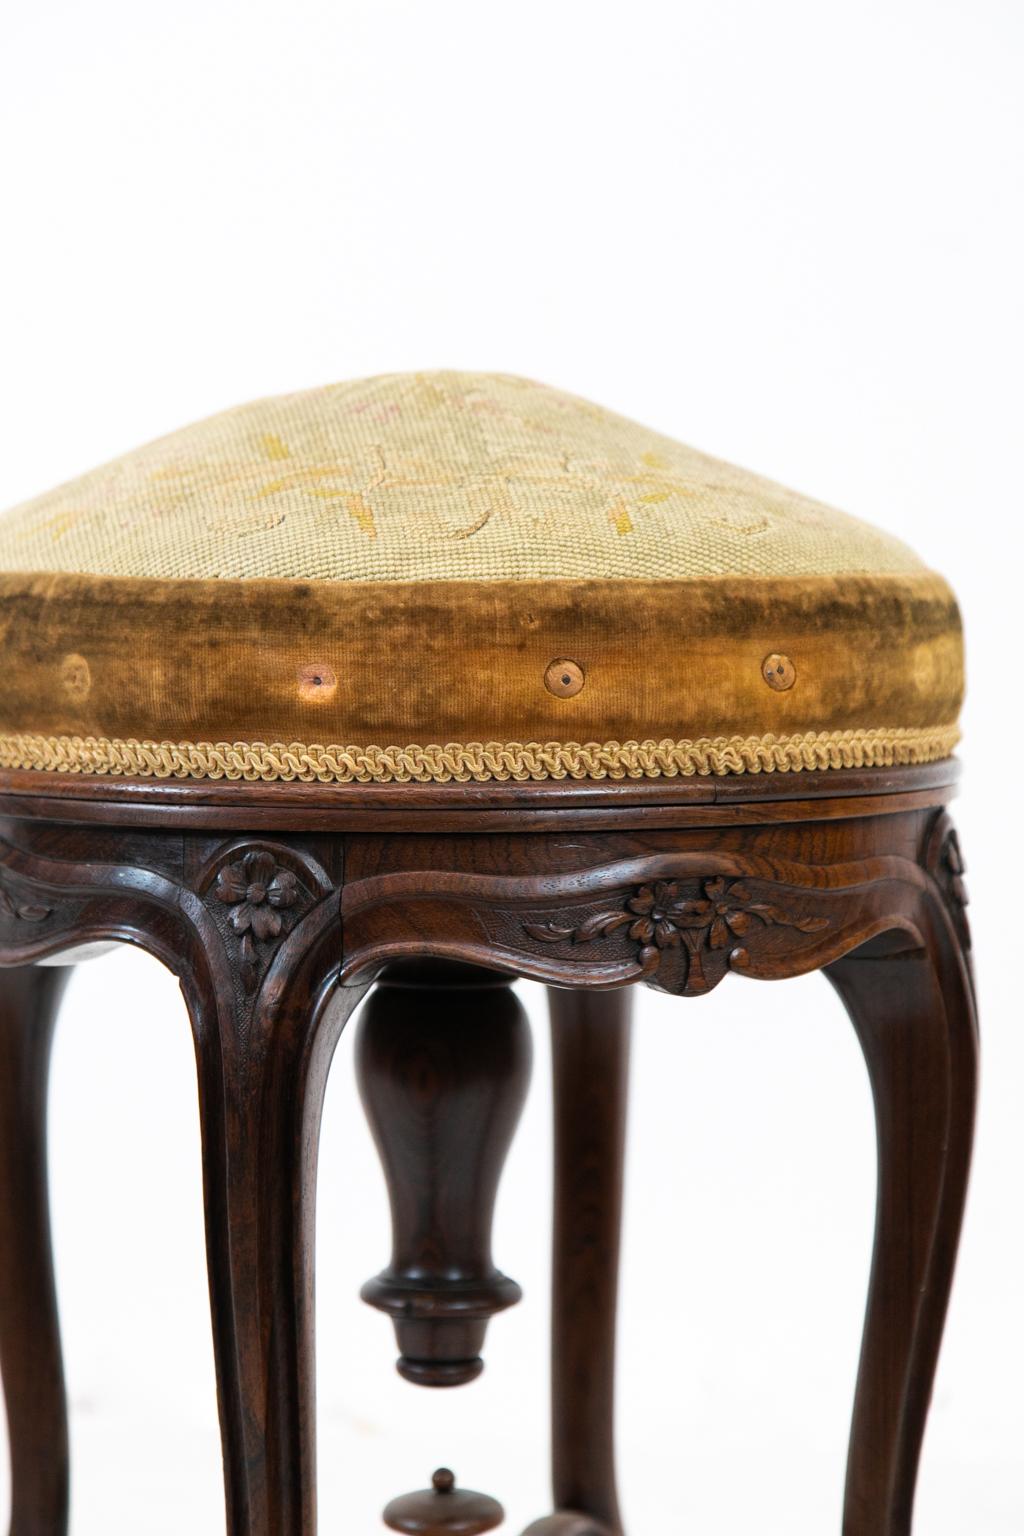 English rosewood cross stretcher stool, has carved rosettes and scroll work joined by two turned carved scroll shaped cross stretchers. The center joint of the stretchers has a turned finial. The needlepoint seat is floral with stitched initials.
  